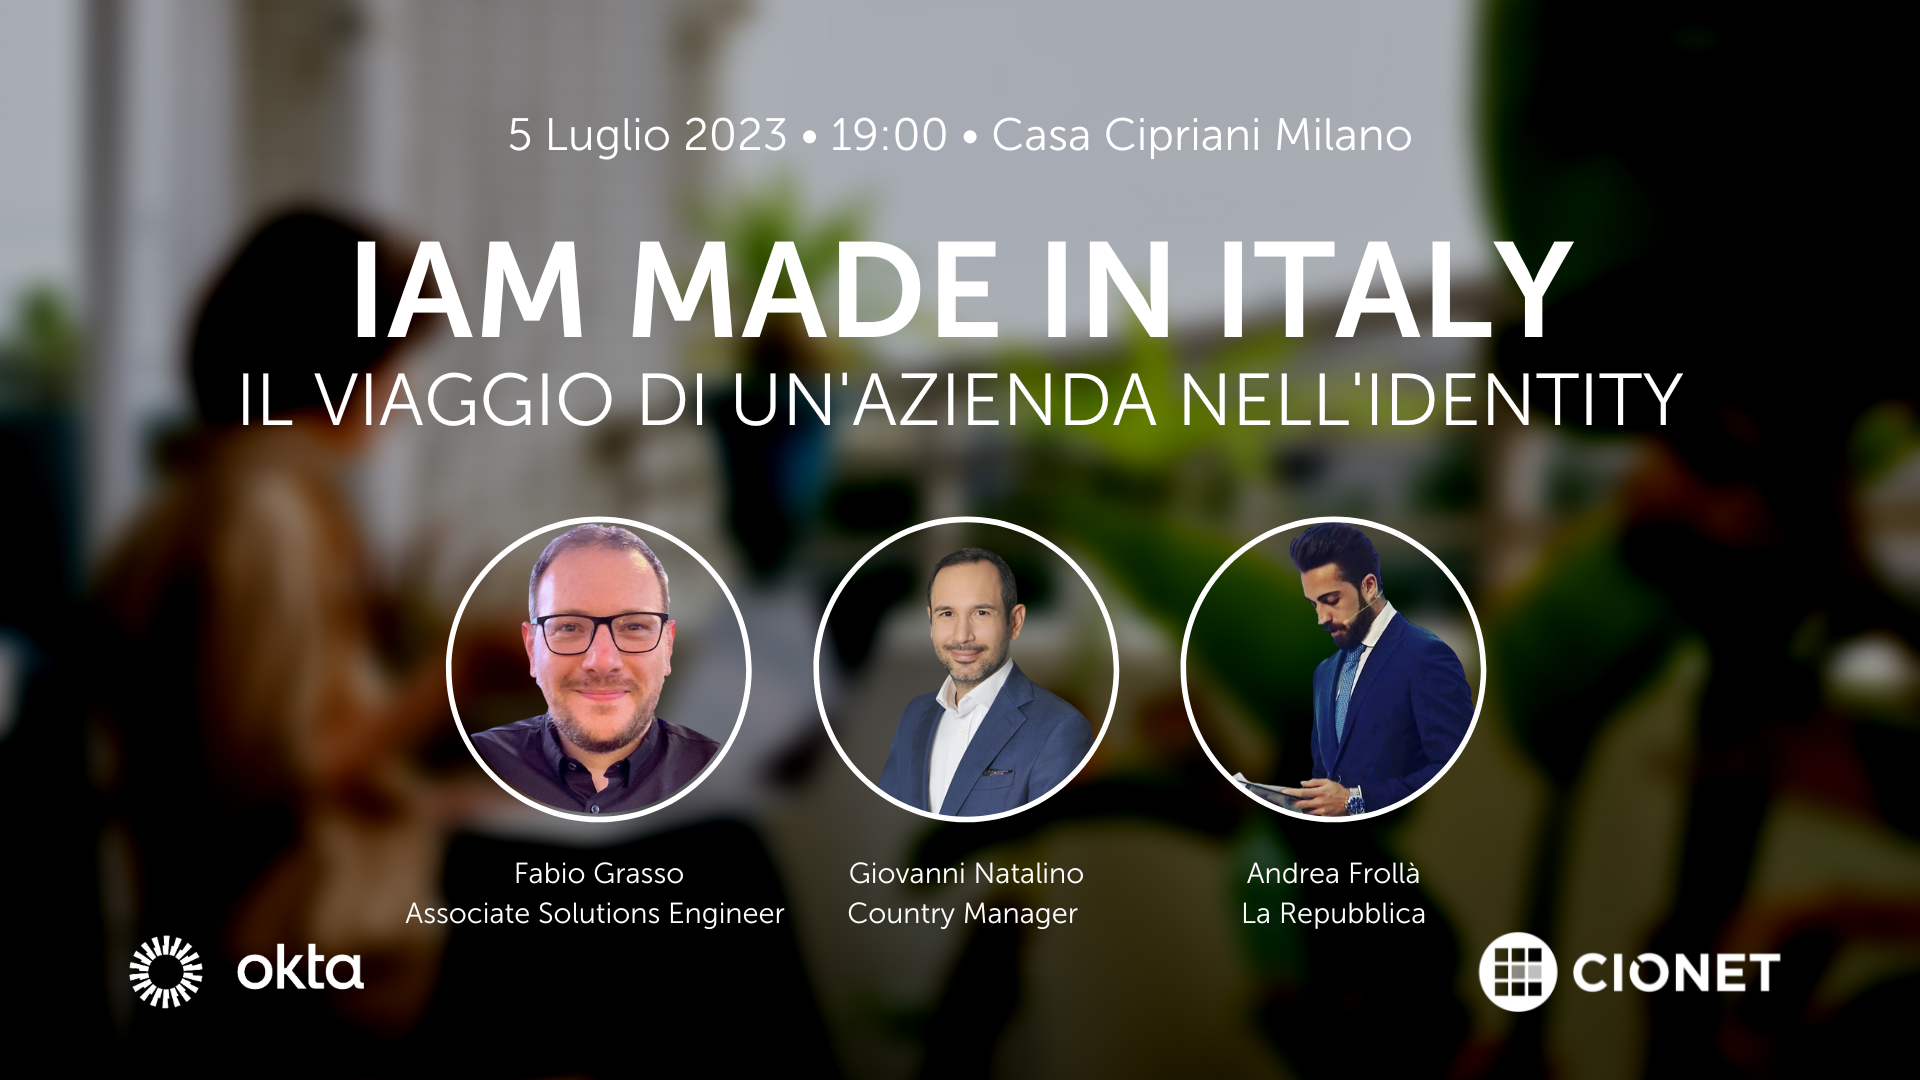 IT20230615 - IAM MADE IN ITALY (2)